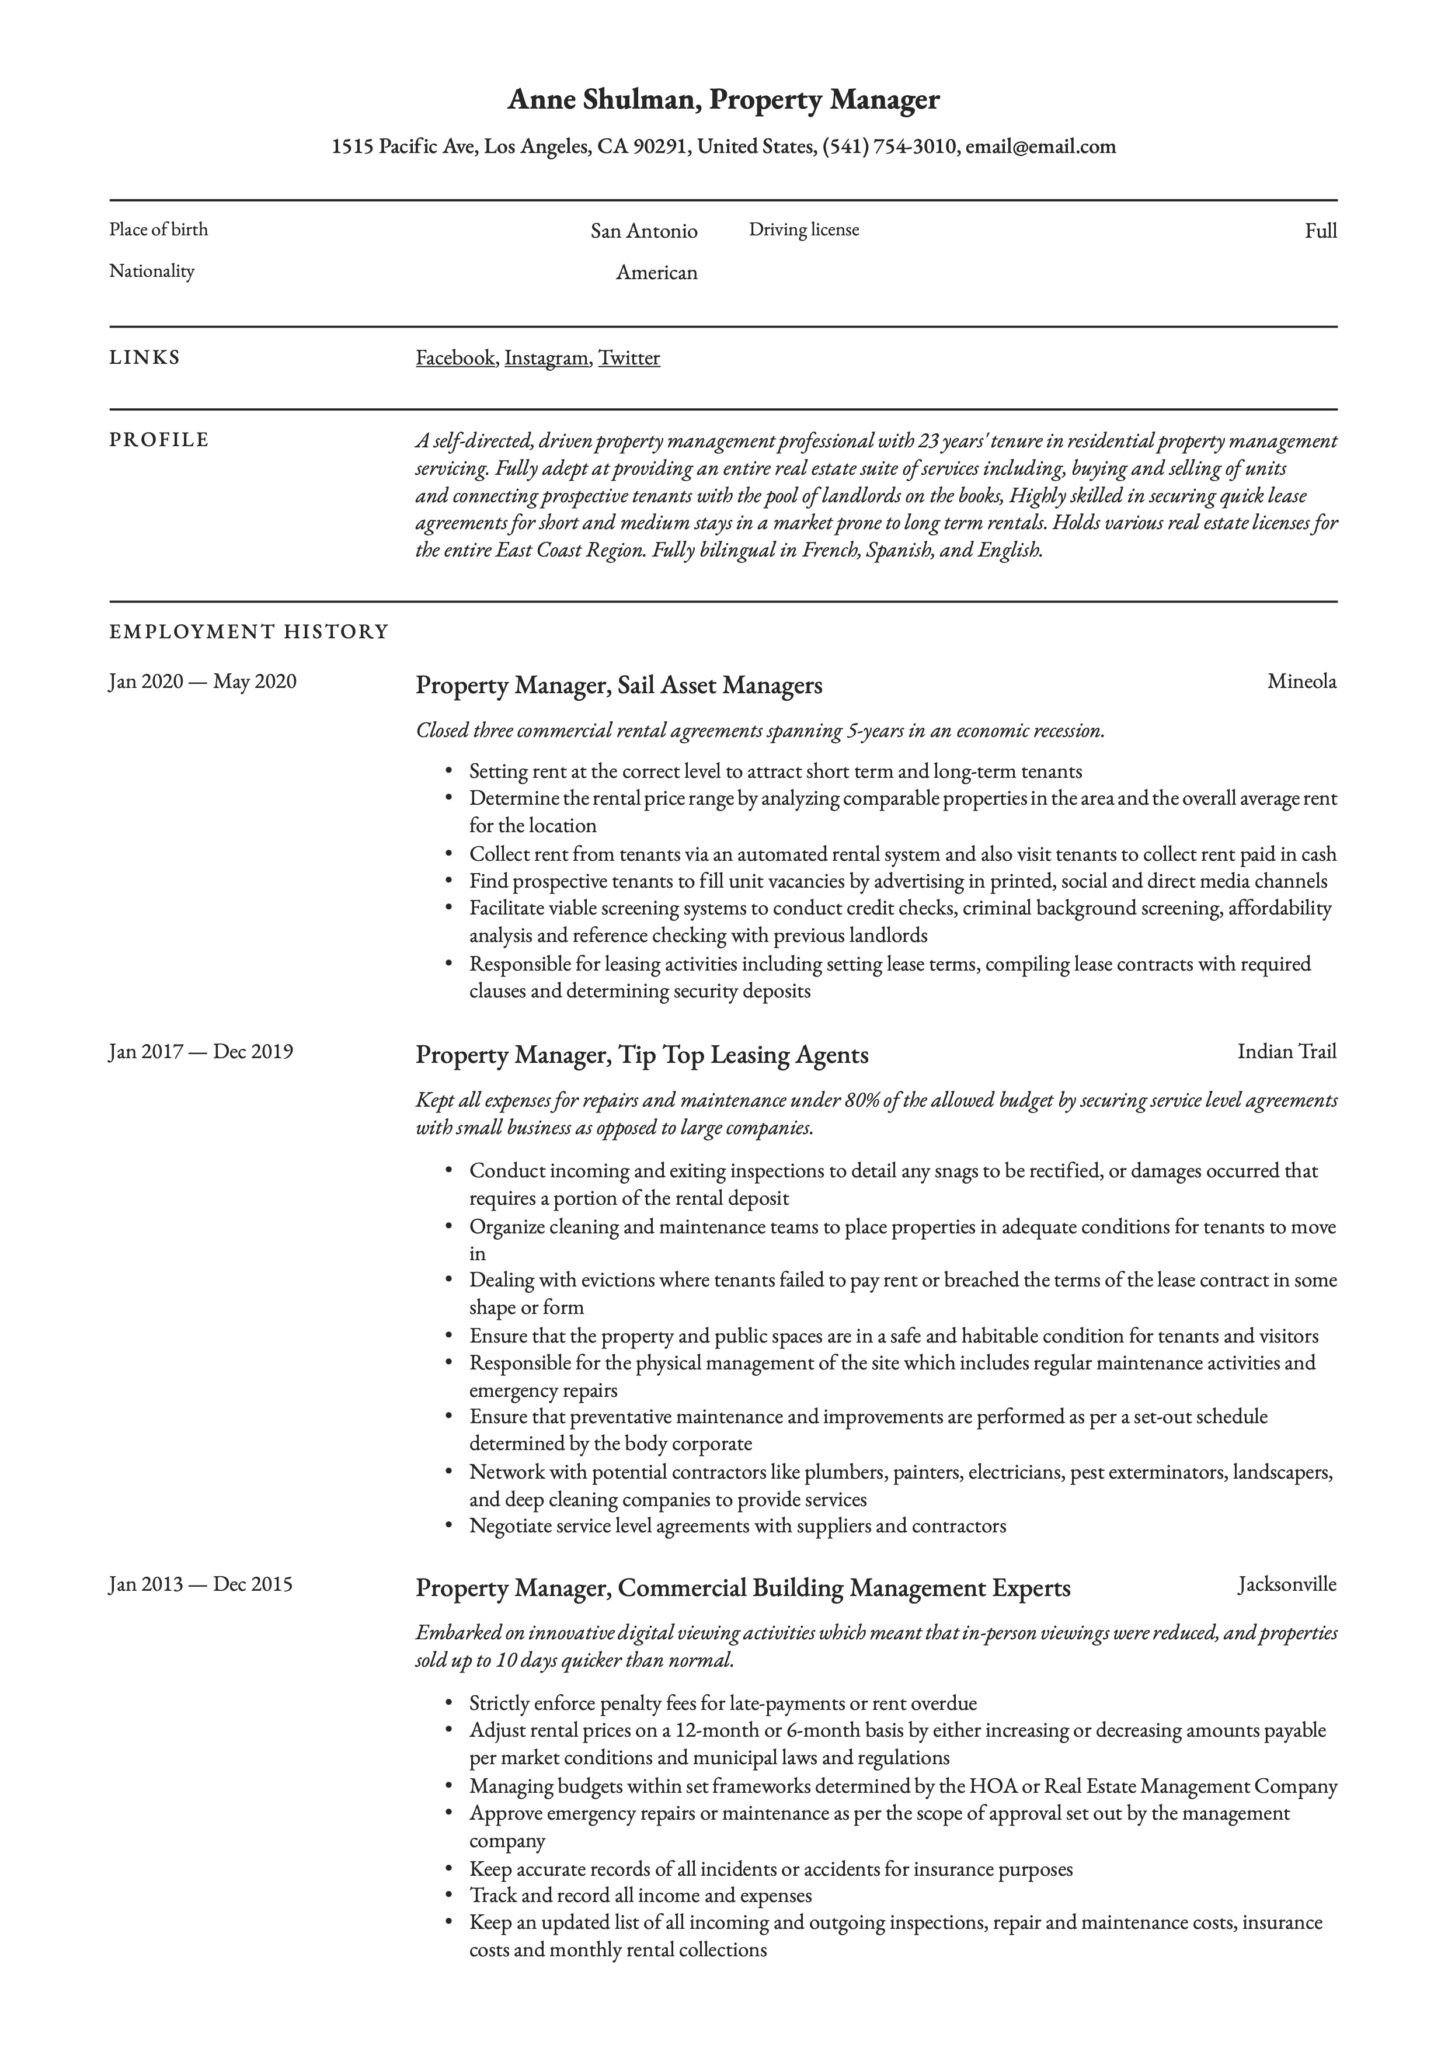 Real Estate Team Leader Resume Sample Property Manager Resume & Writing Guide  18 Templates 2020